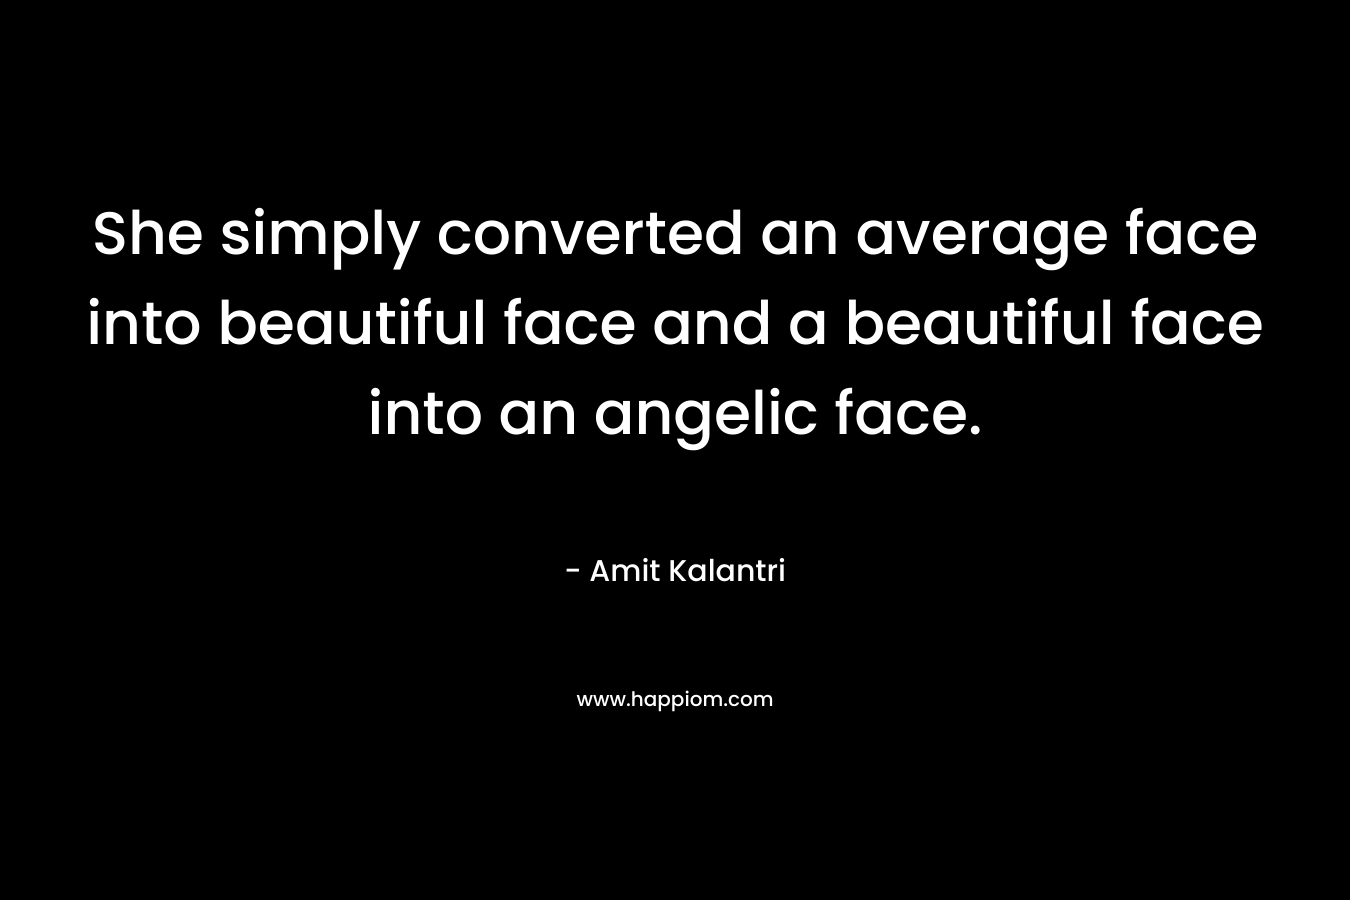 She simply converted an average face into beautiful face and a beautiful face into an angelic face.